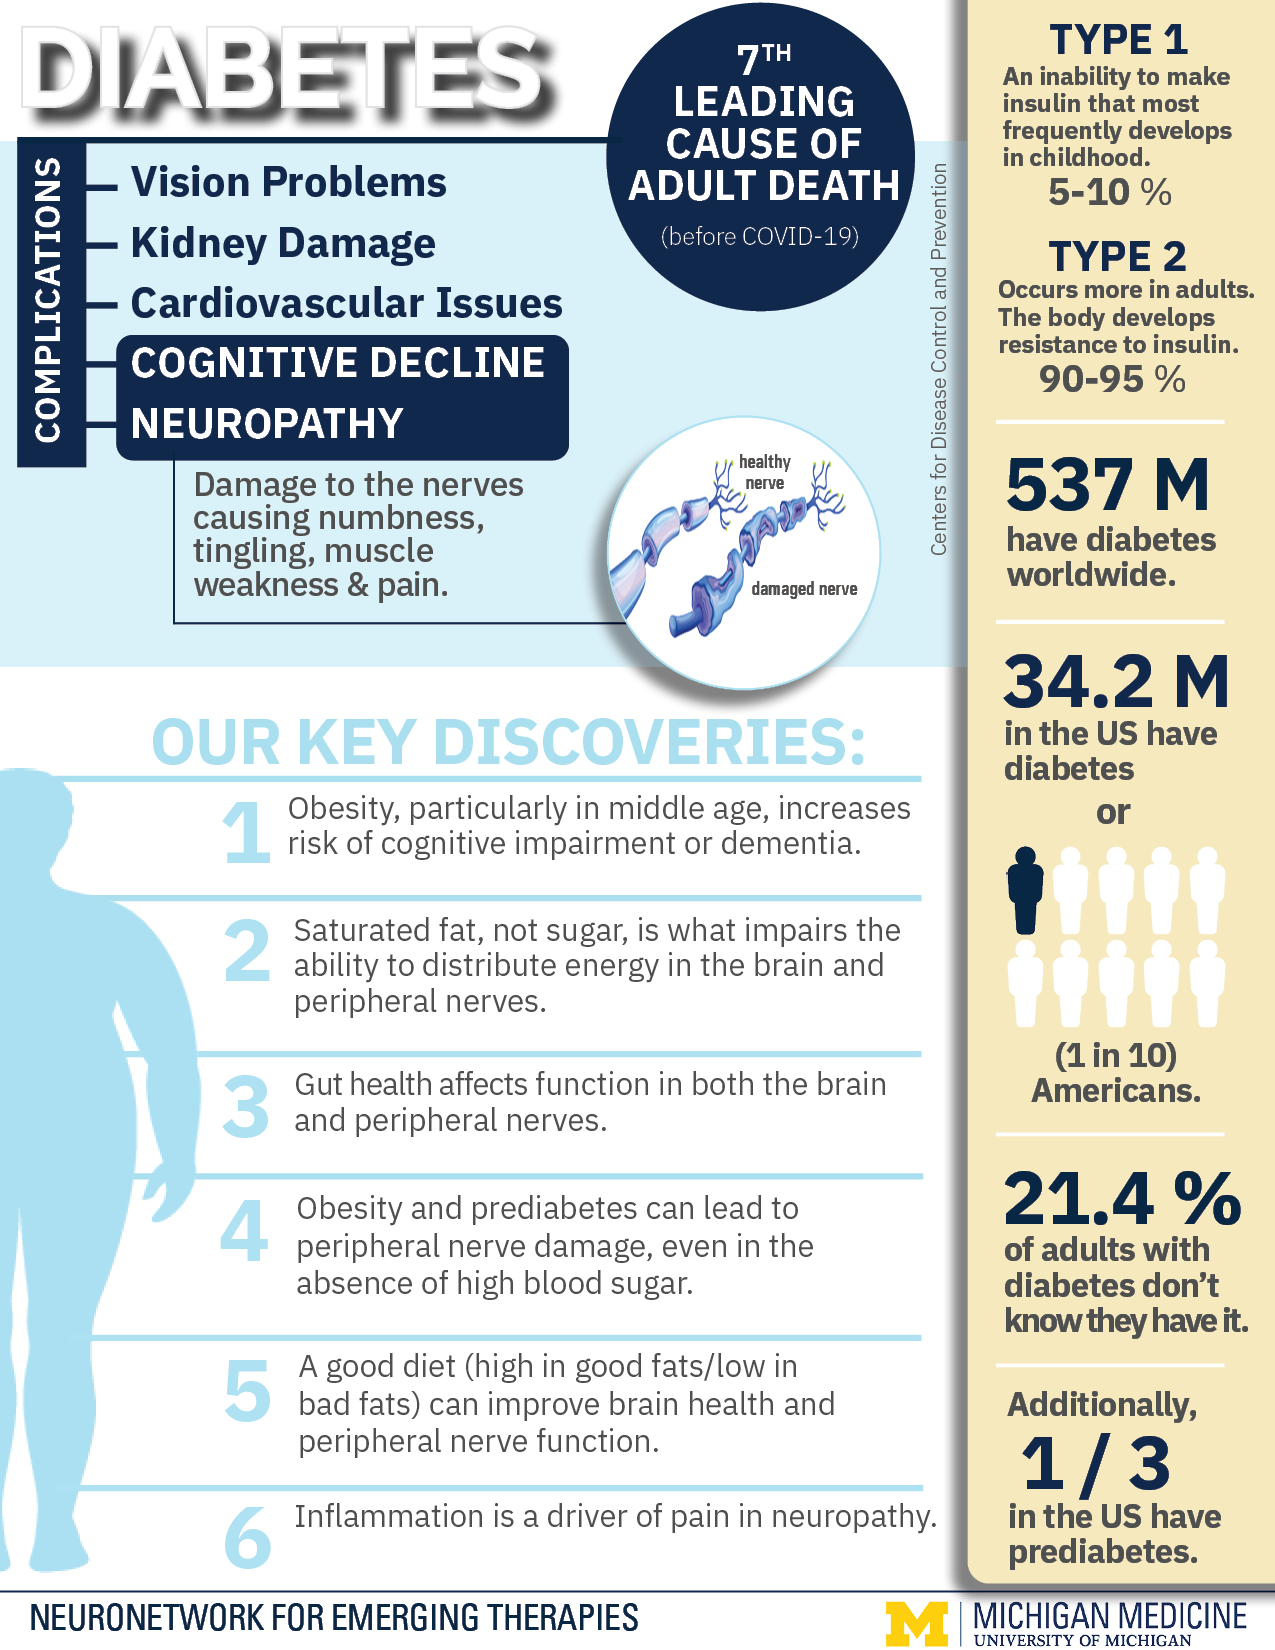 NeuroNetwork for Emerging Therapies Diabetes Infographic